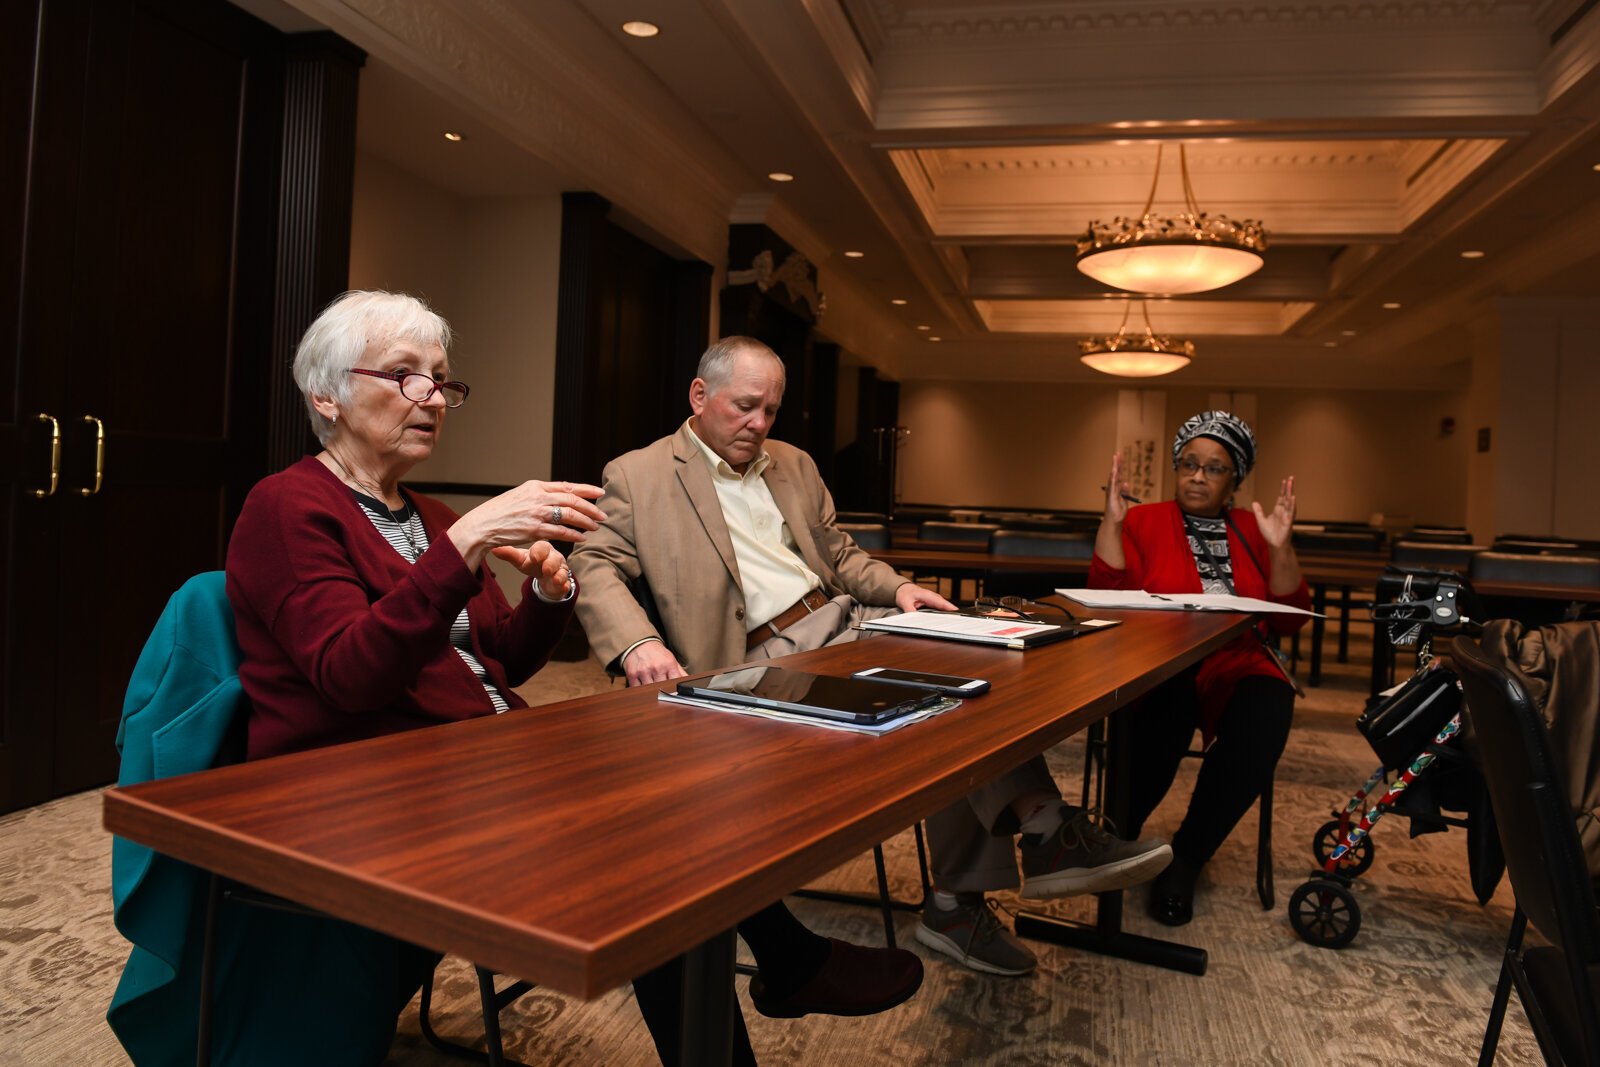 Becky Weimerskirch, left, speaks during a council meeting with members of the Mayor's Age-Friendly Council at Citizen's Square.